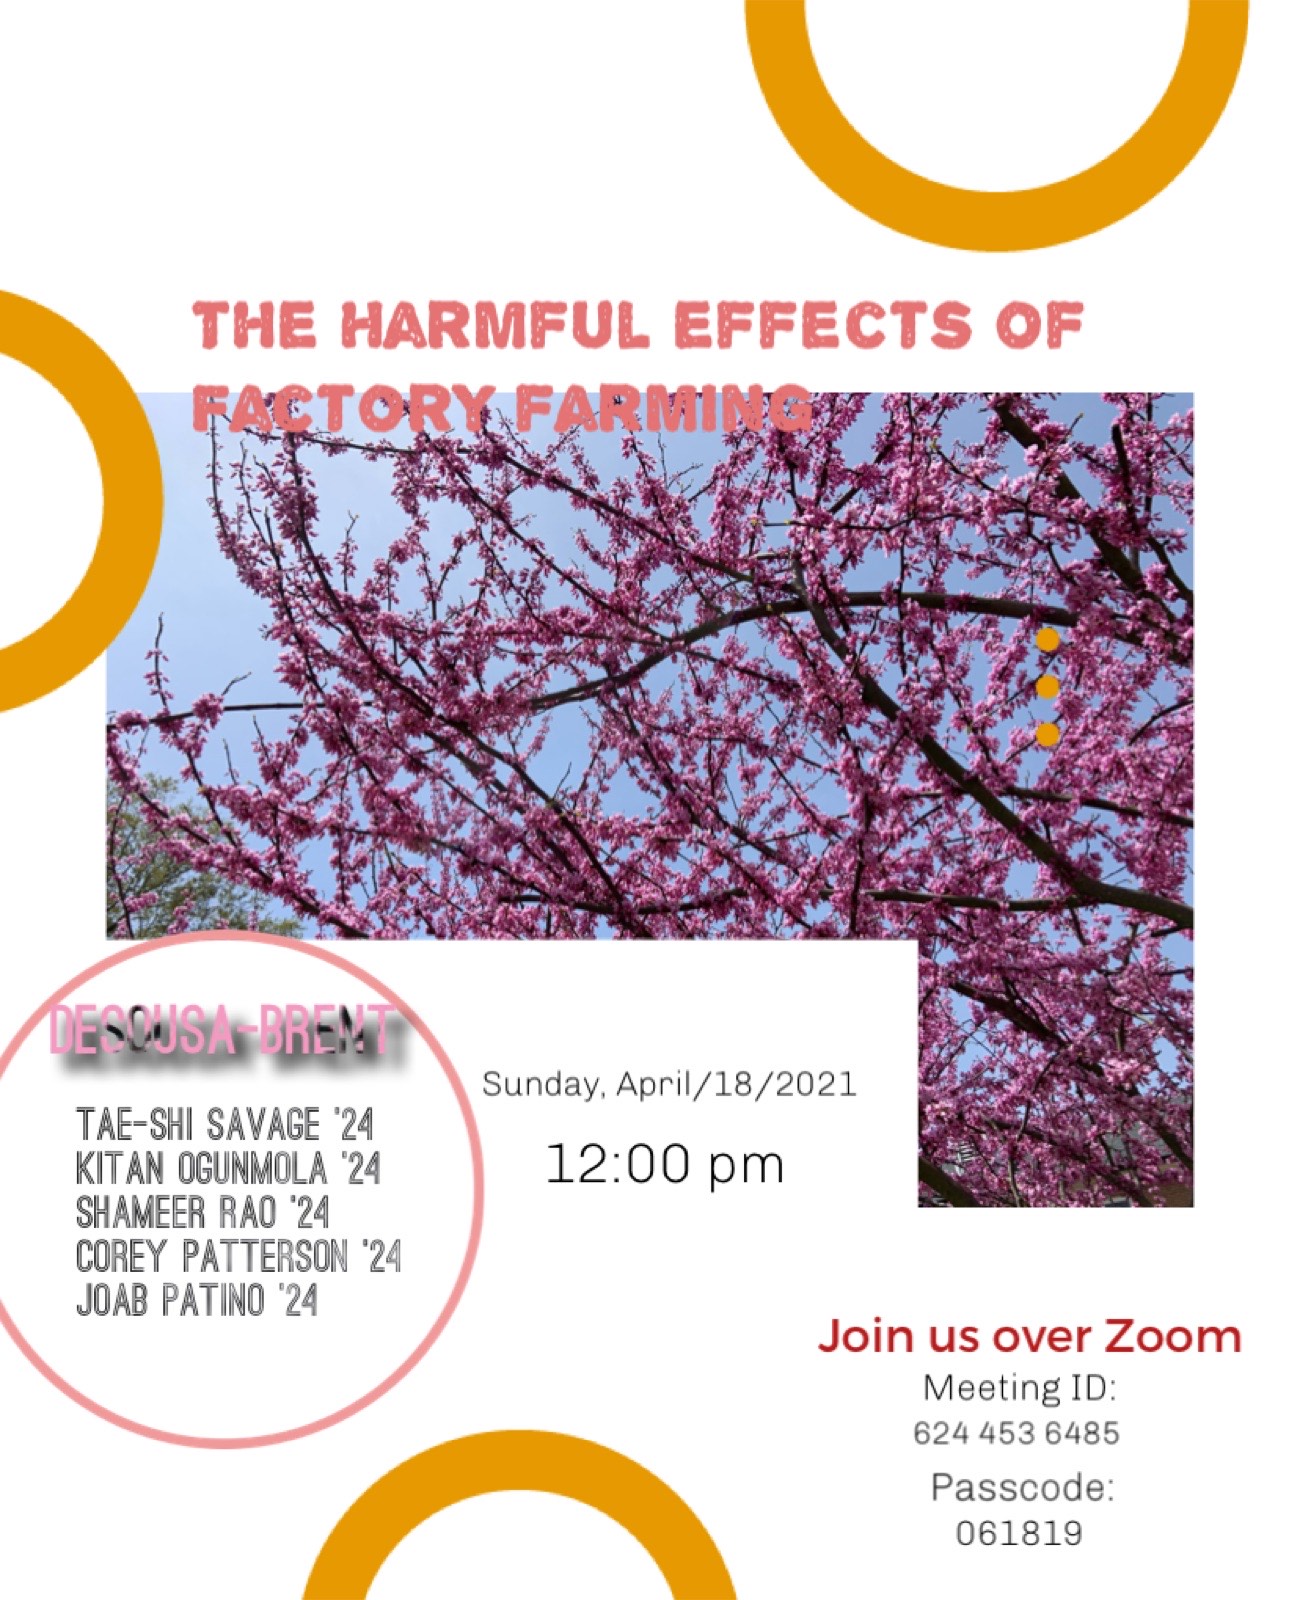 Poster with orange circles and a picture of a blooming pink tree. Event information repeated in descpription